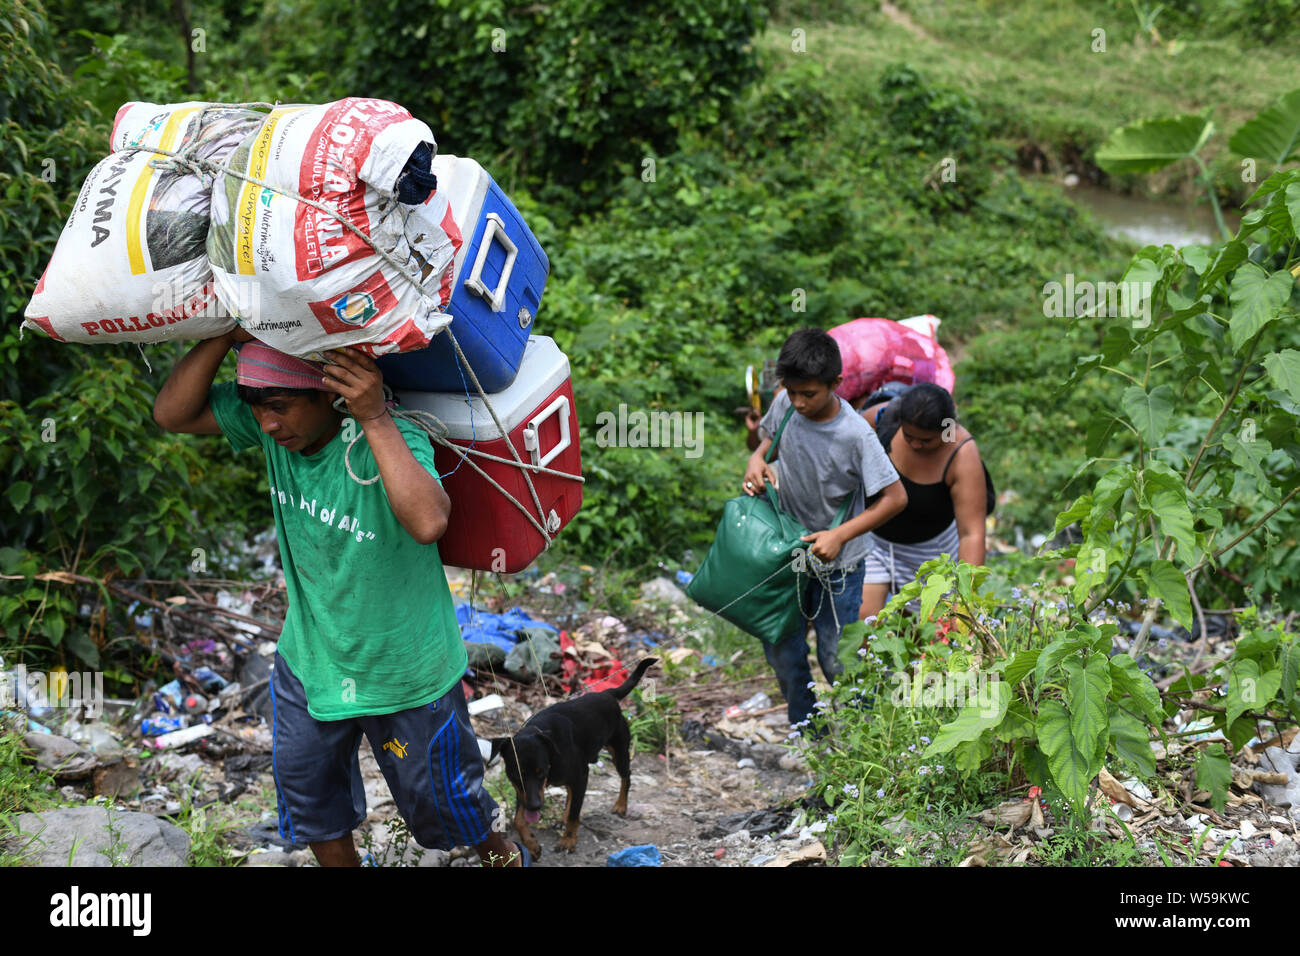 July 25, 2019, Talisman, Chiapas, Mexico: With the help of porters, Central American families and their pets cross into Mexican territory on Thursday, even as Guatemala signed a treaty with the US designating it a 'safe'' country for migrants. Credit: Miguel Juarez Lugo/ZUMA Wire/Alamy Live News Stock Photo